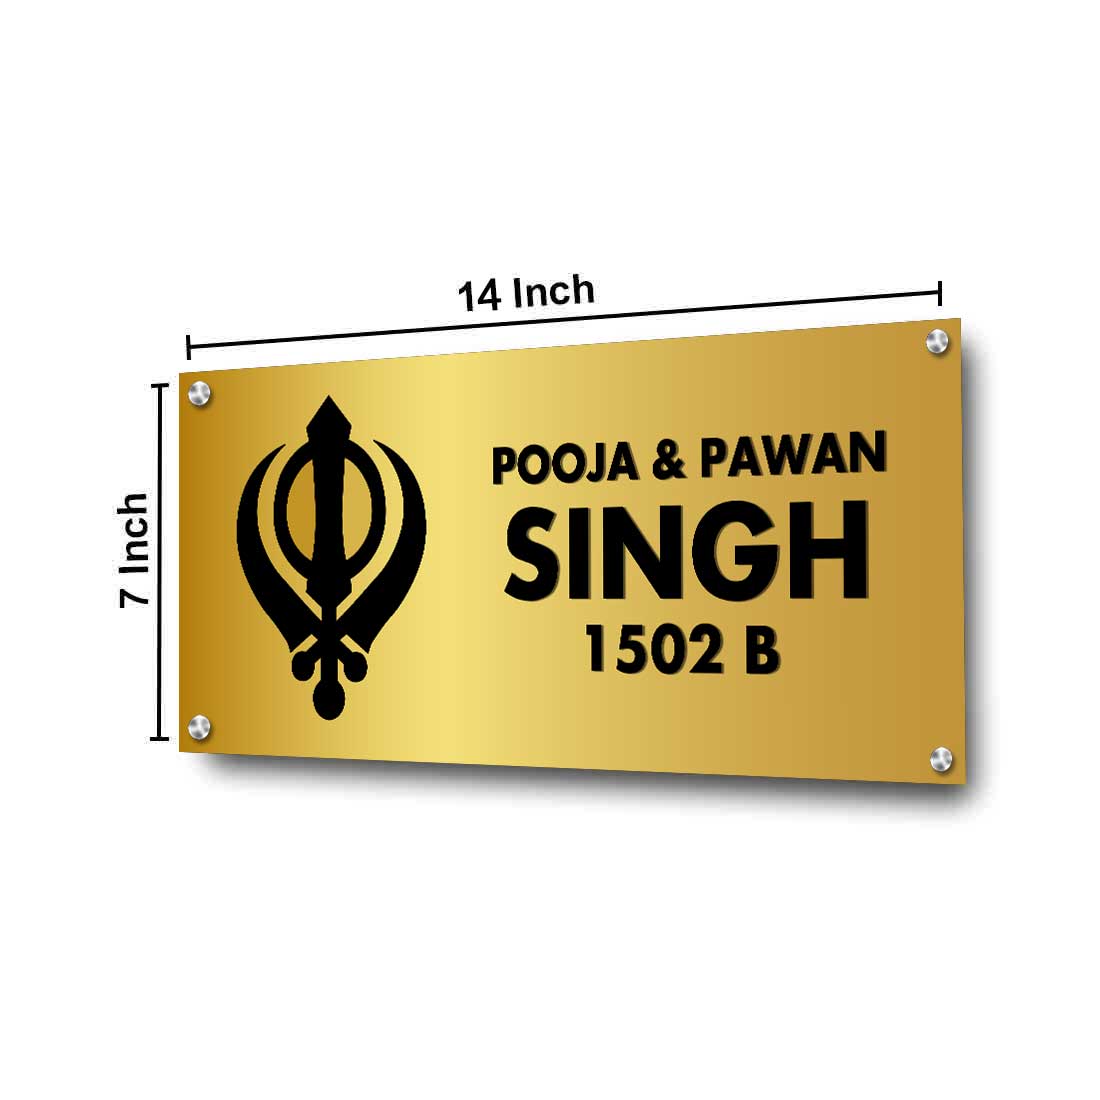 Personalized Name Plate For Khalsa